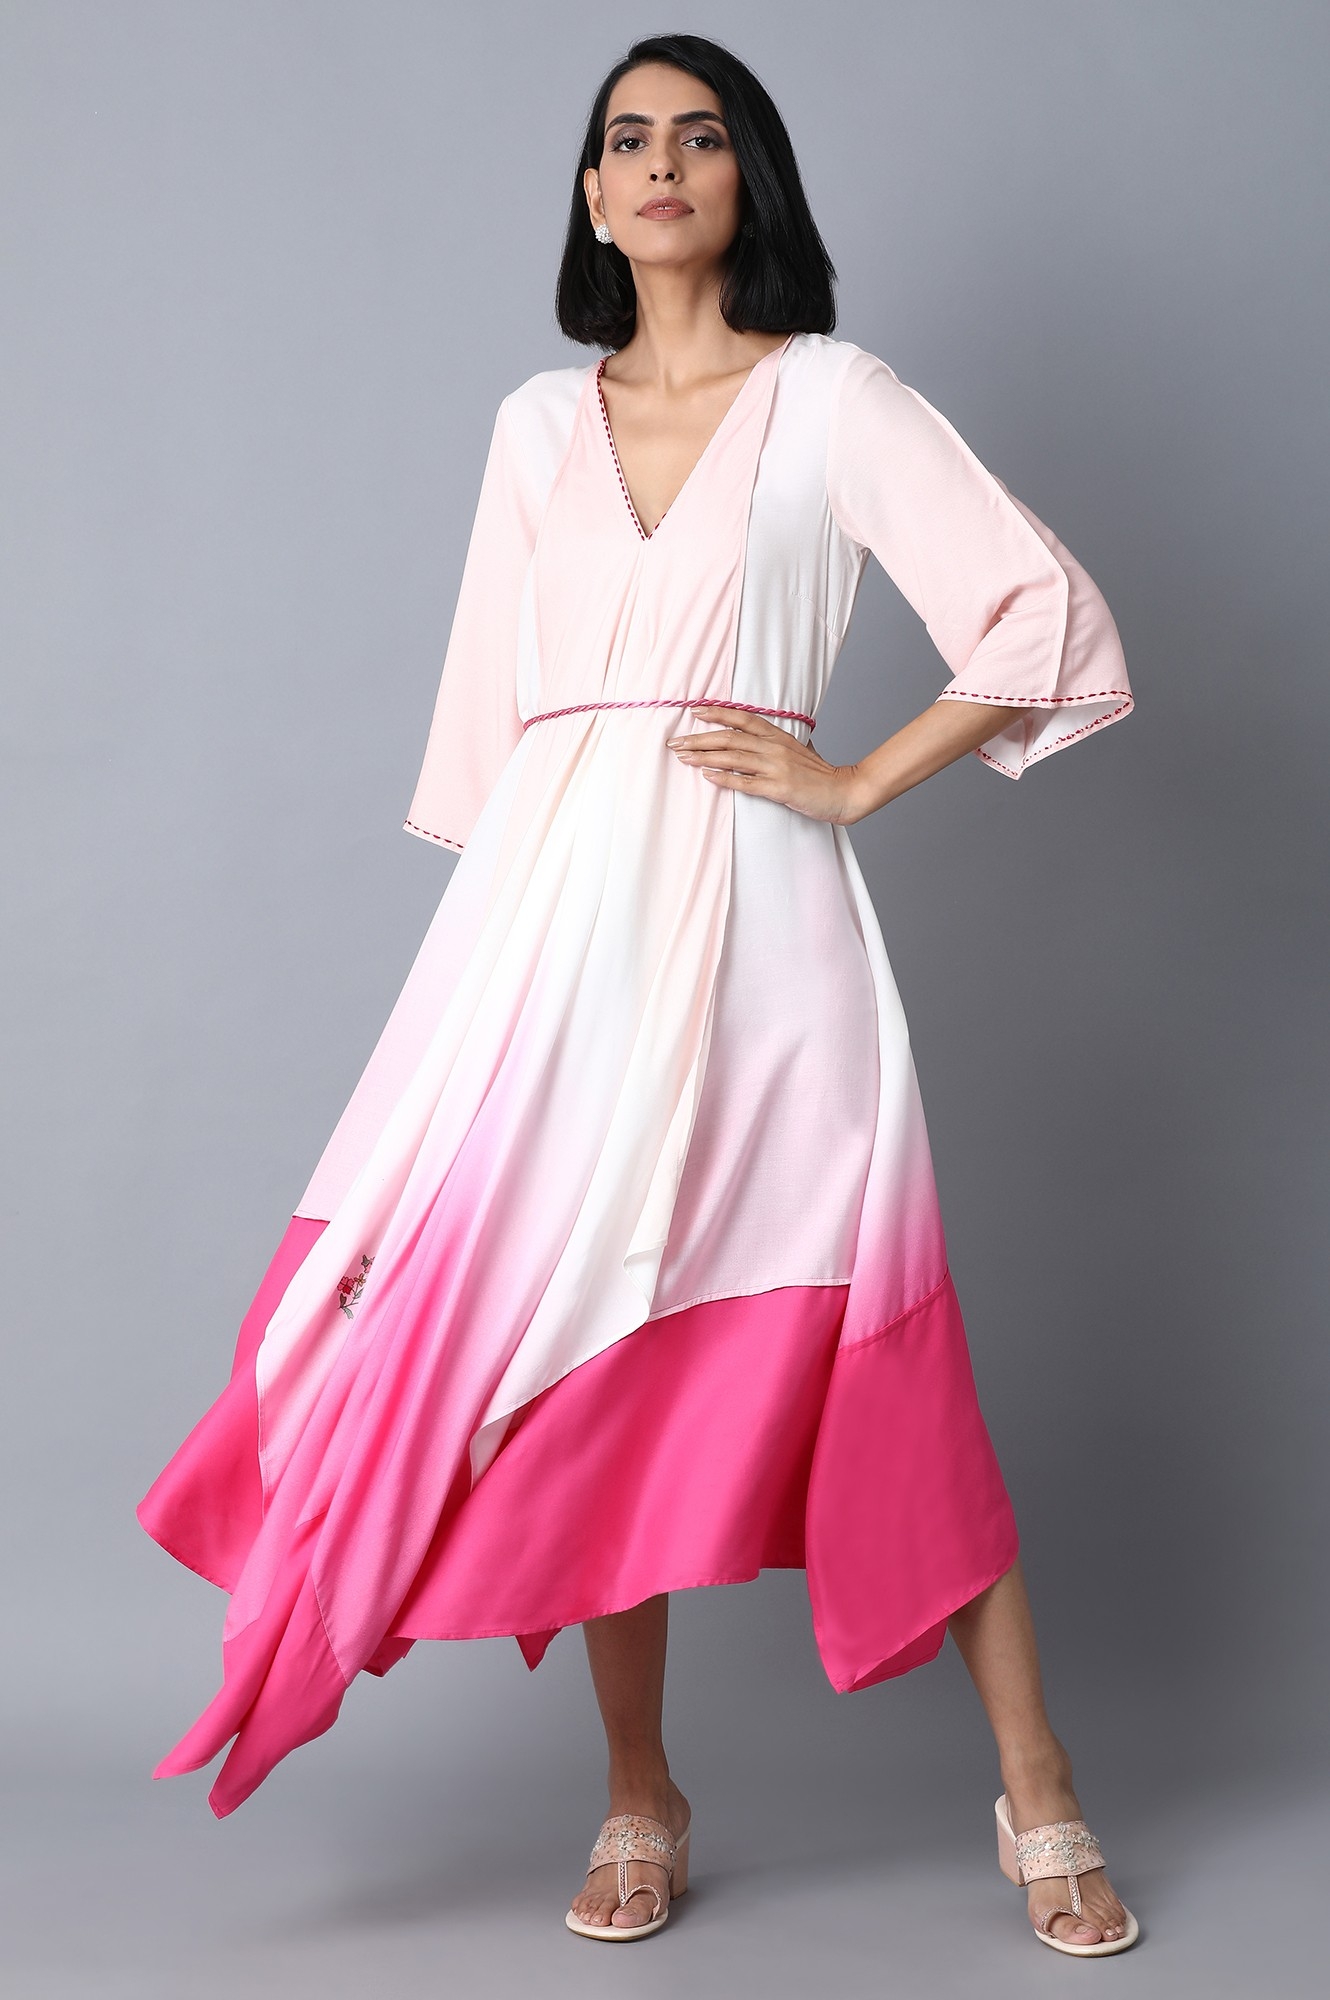 W | Pink and Ecru Color Blocked Asymetric Dress